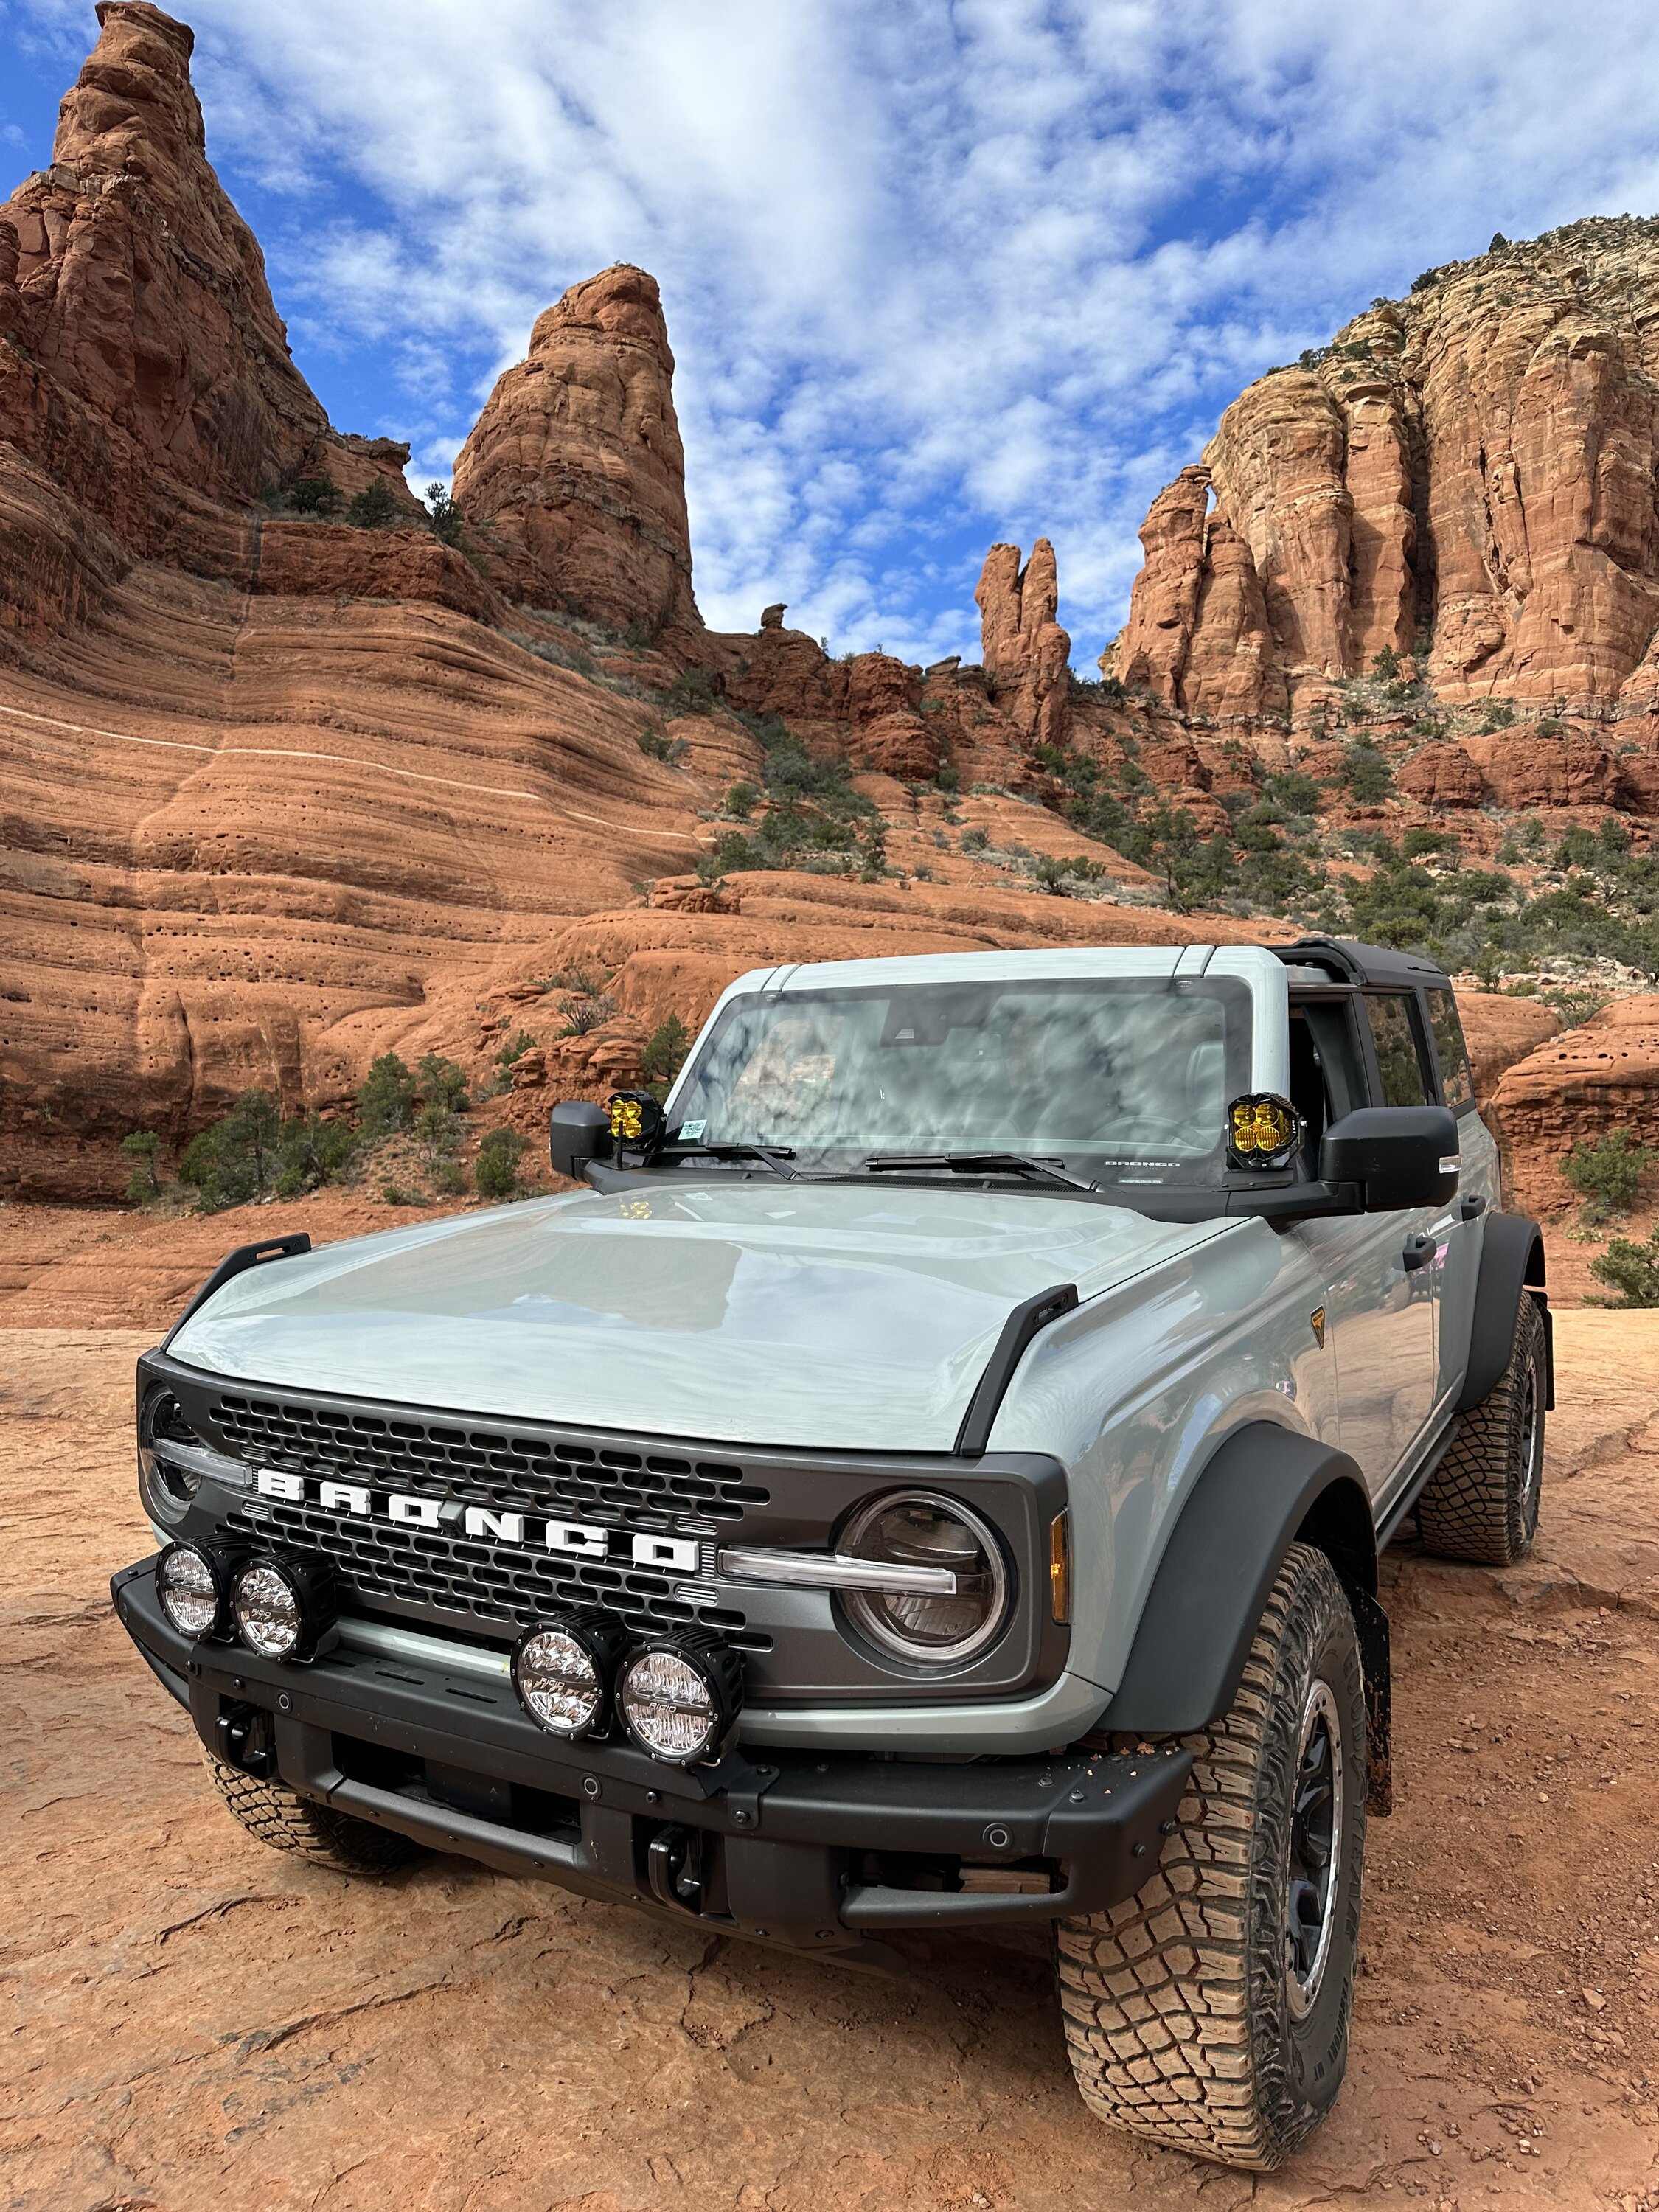 Ford Bronco Let's see your favorite Bronco picture of 2022 📸 35A8073F-7A80-4B13-894B-3EDF28B3A864